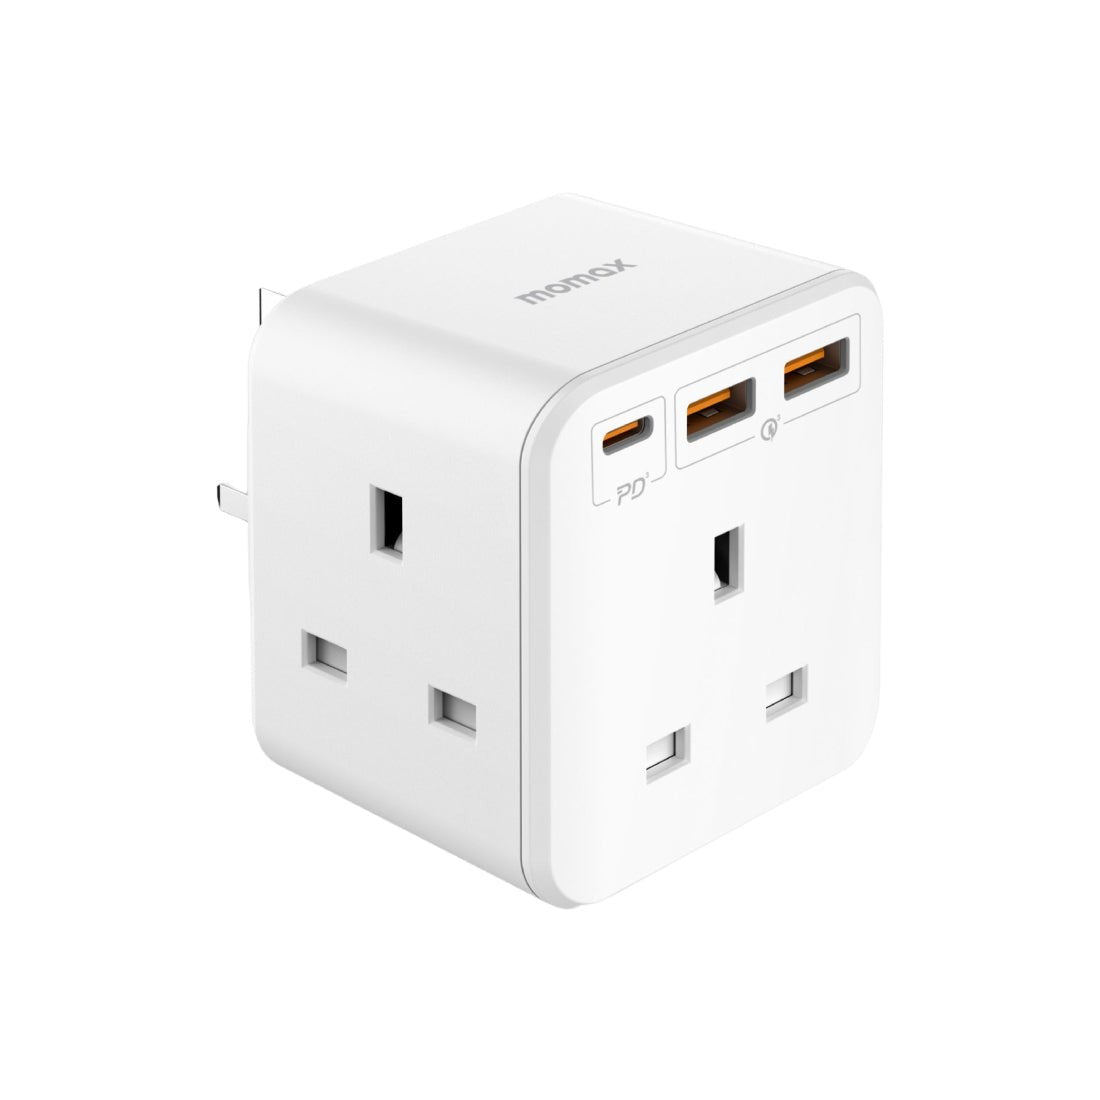 Momax OnePlug 3-Outlet Cube Extension Socket With USB - White - محول - Store 974 | ستور ٩٧٤